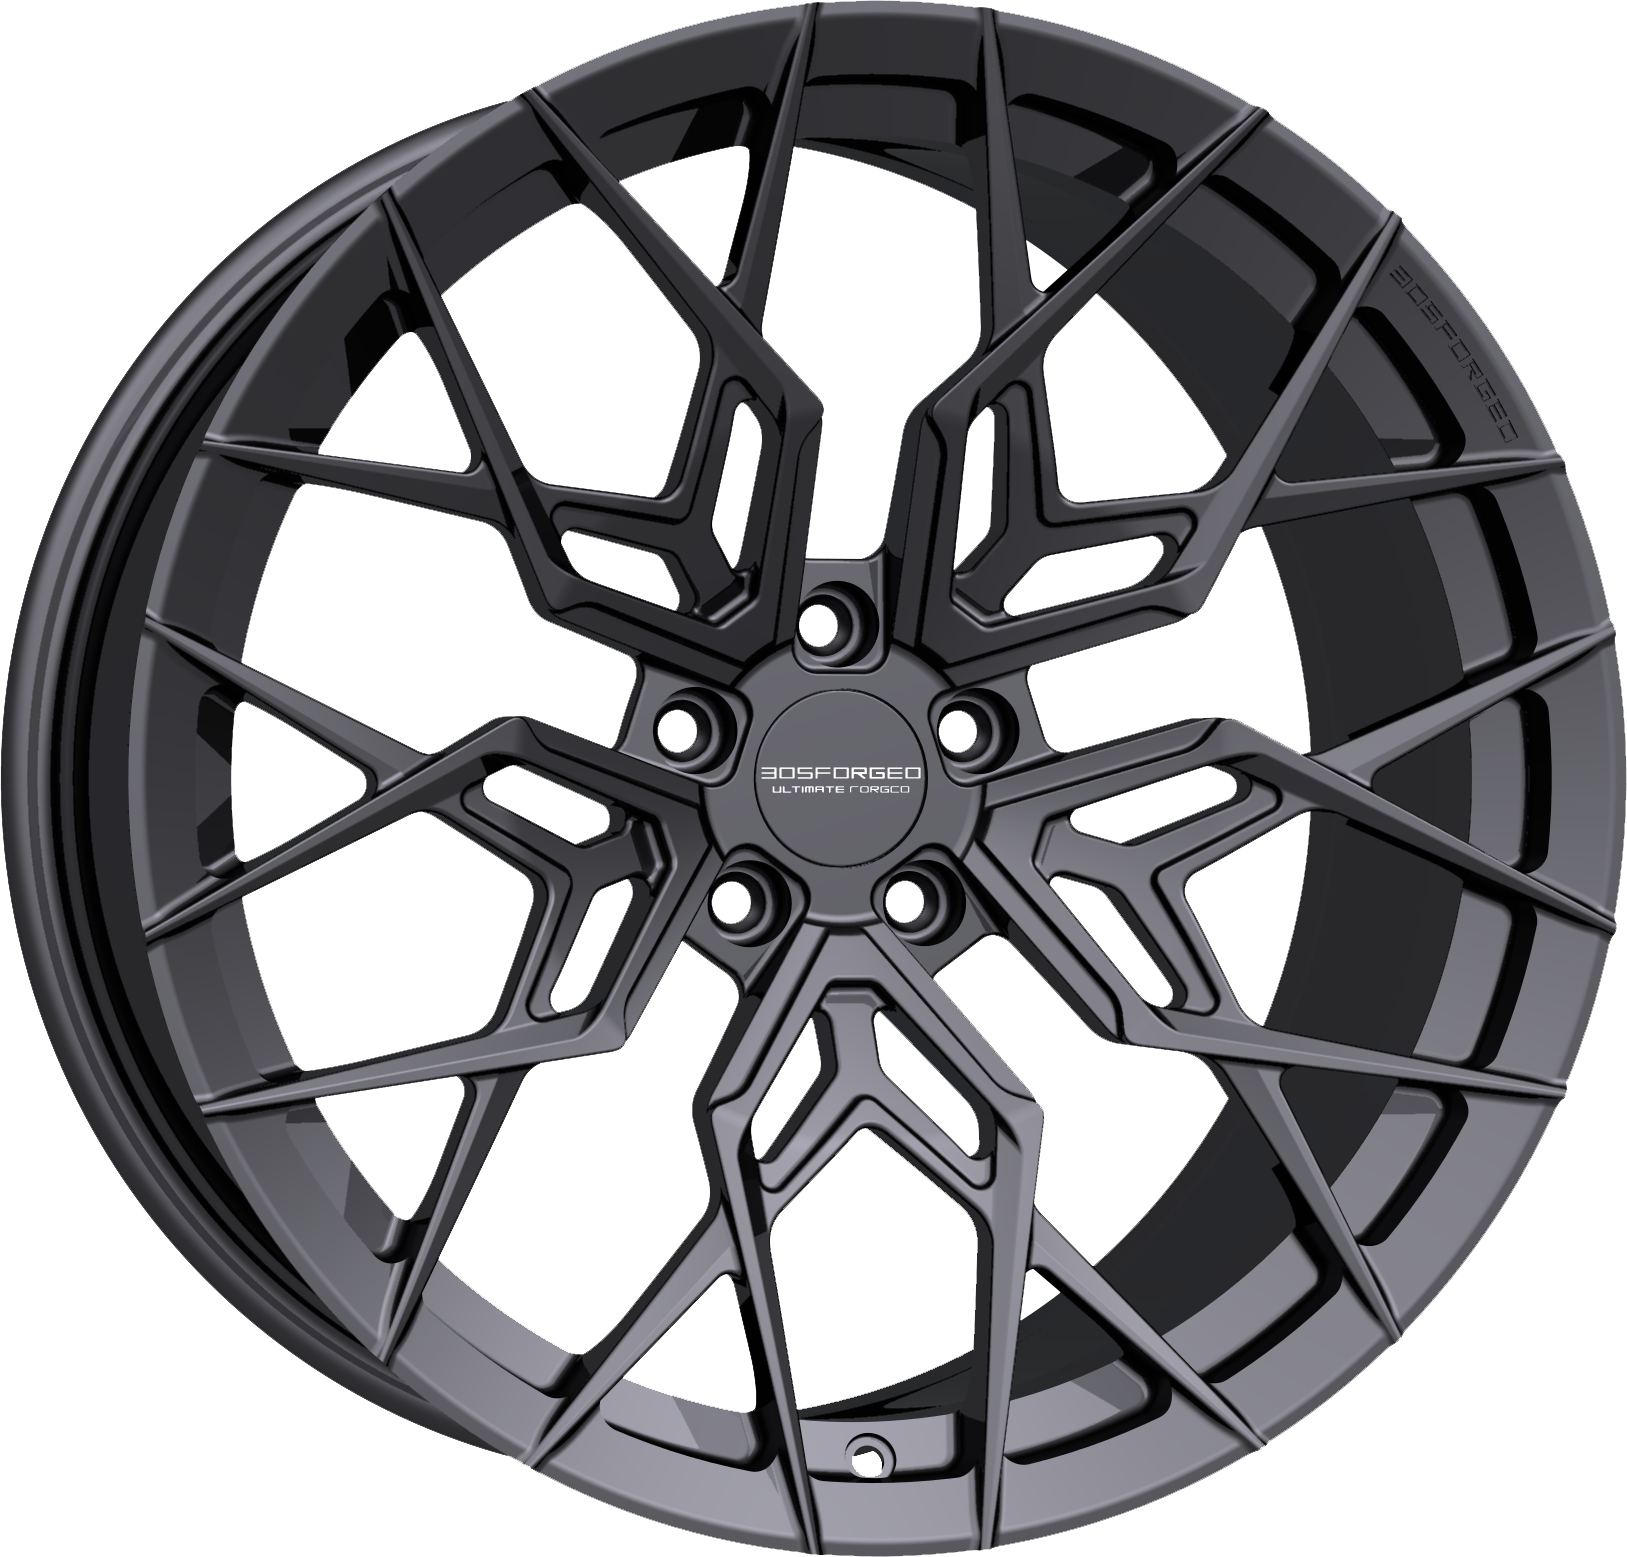 305 Forged UF129 forged wheels